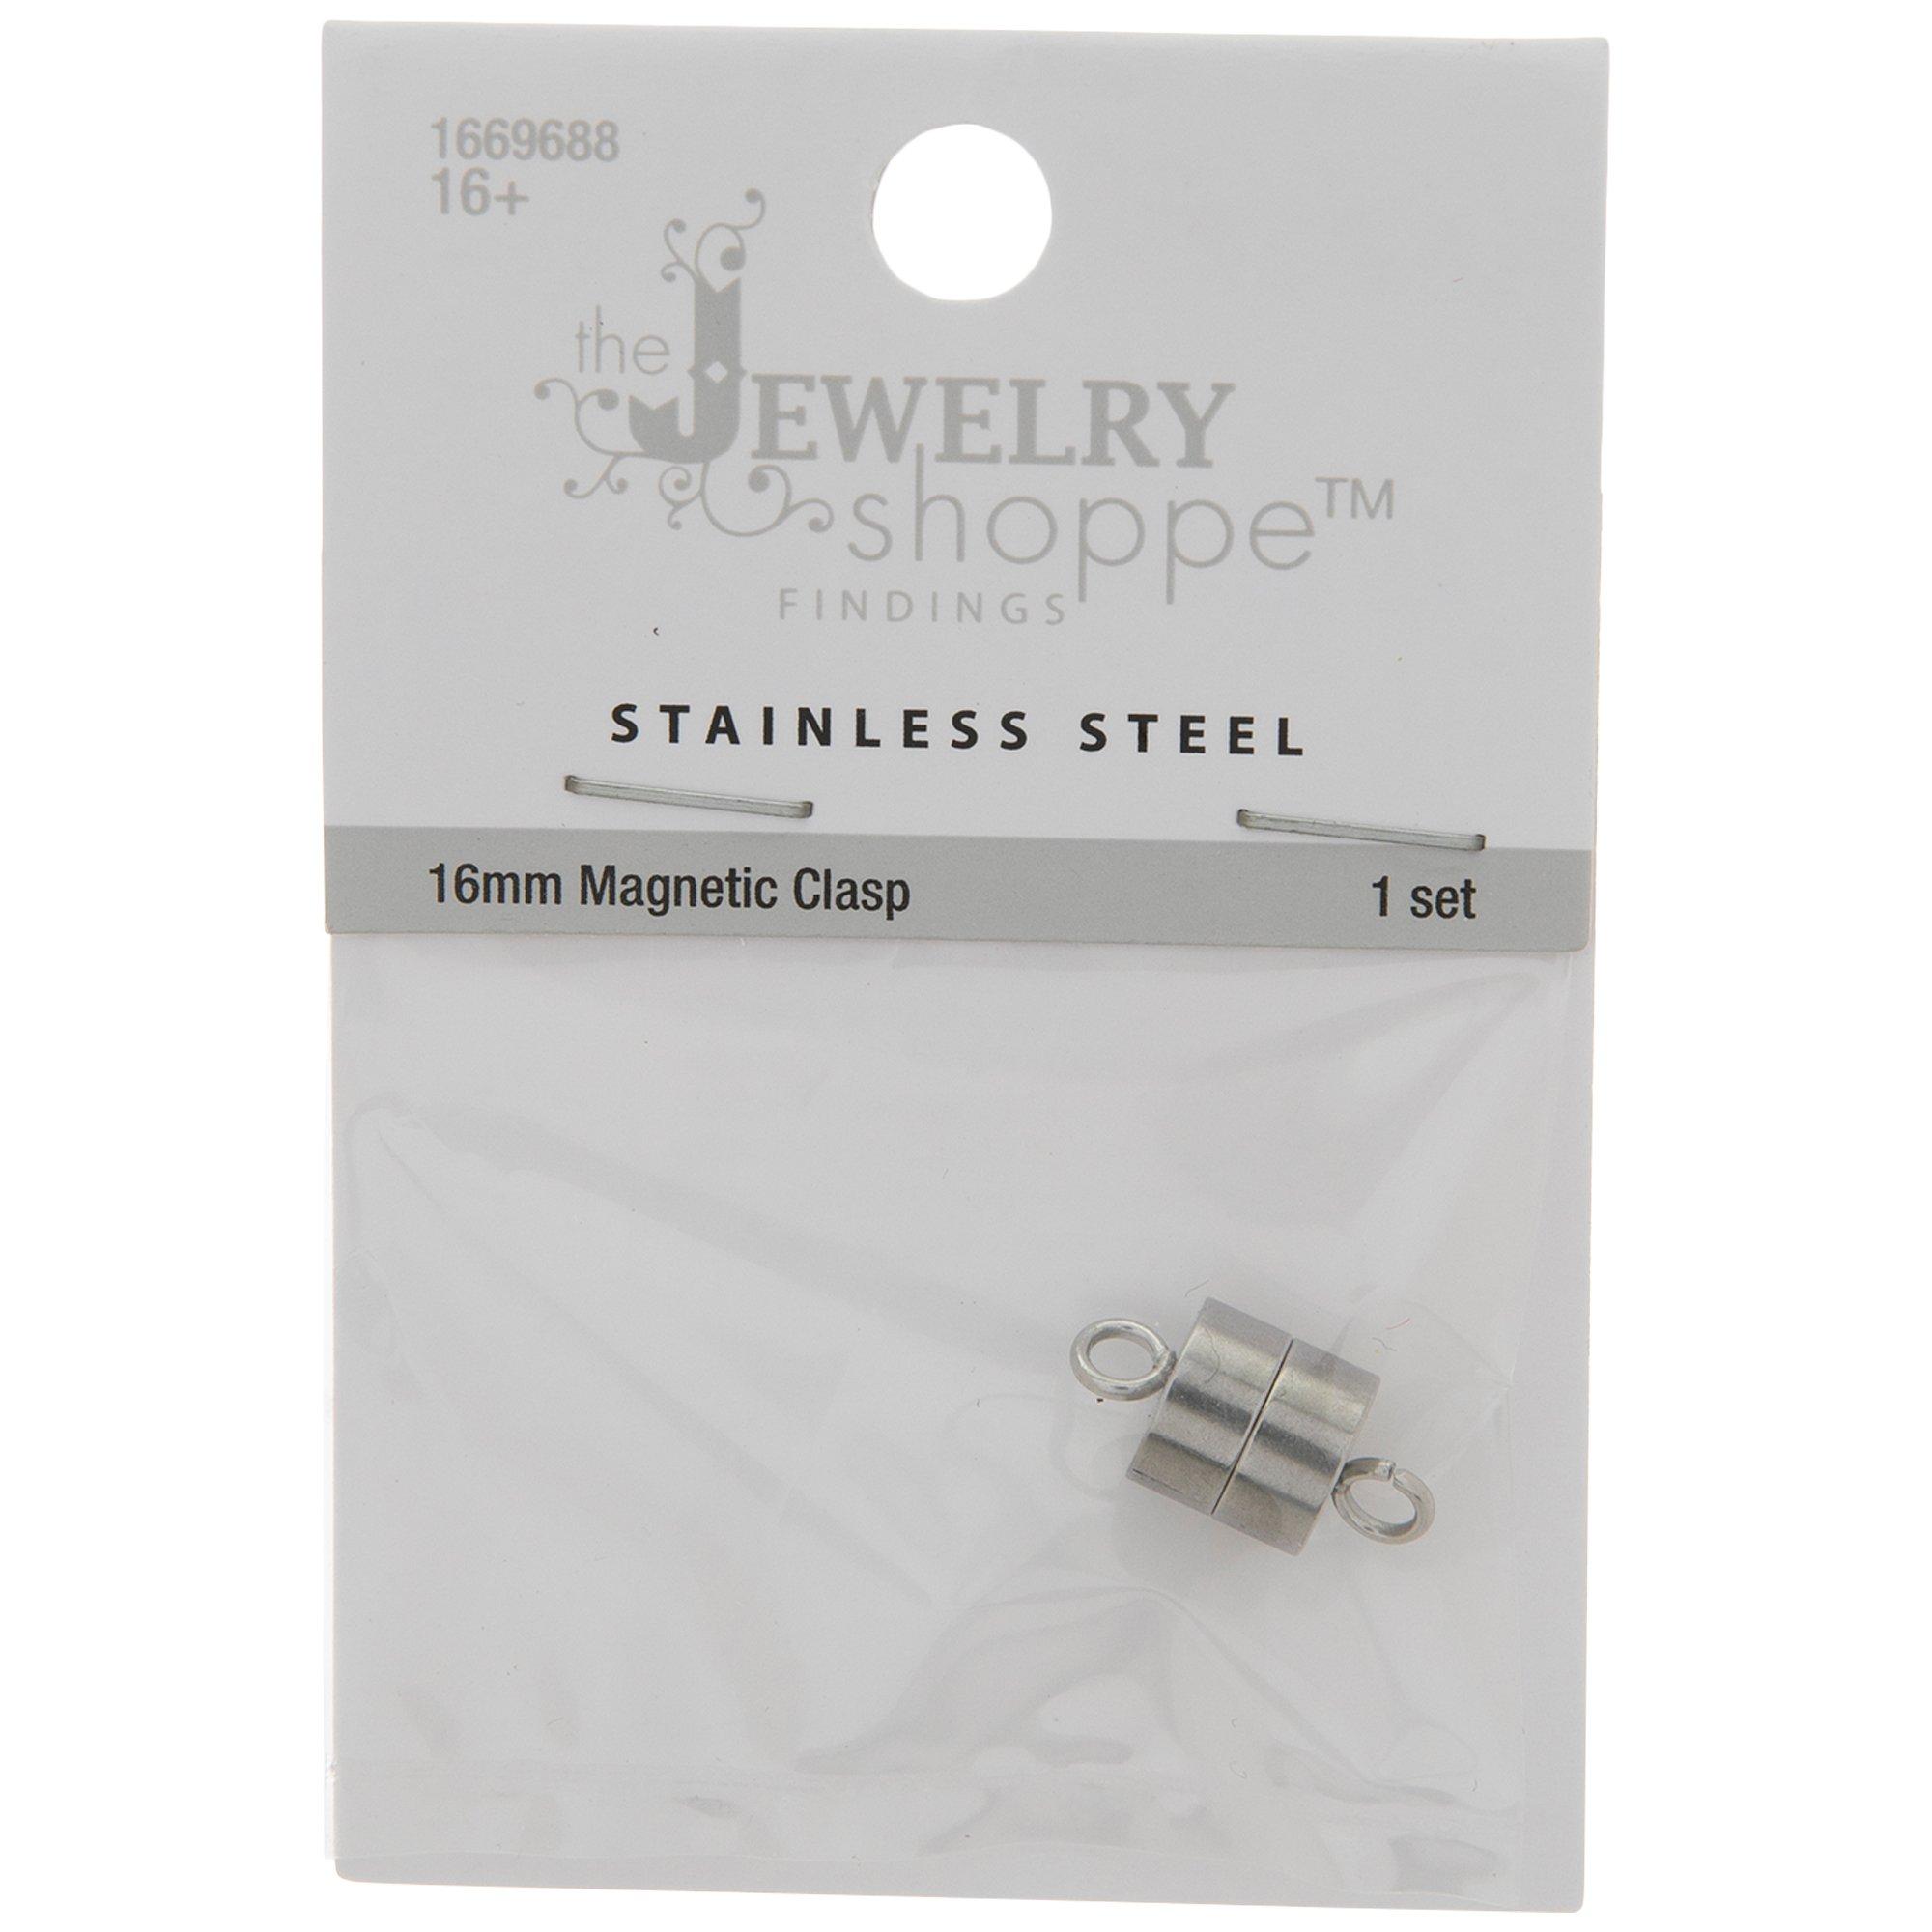 Magnetic Jewelry Clasps - Needlework Projects, Tools & Accessories